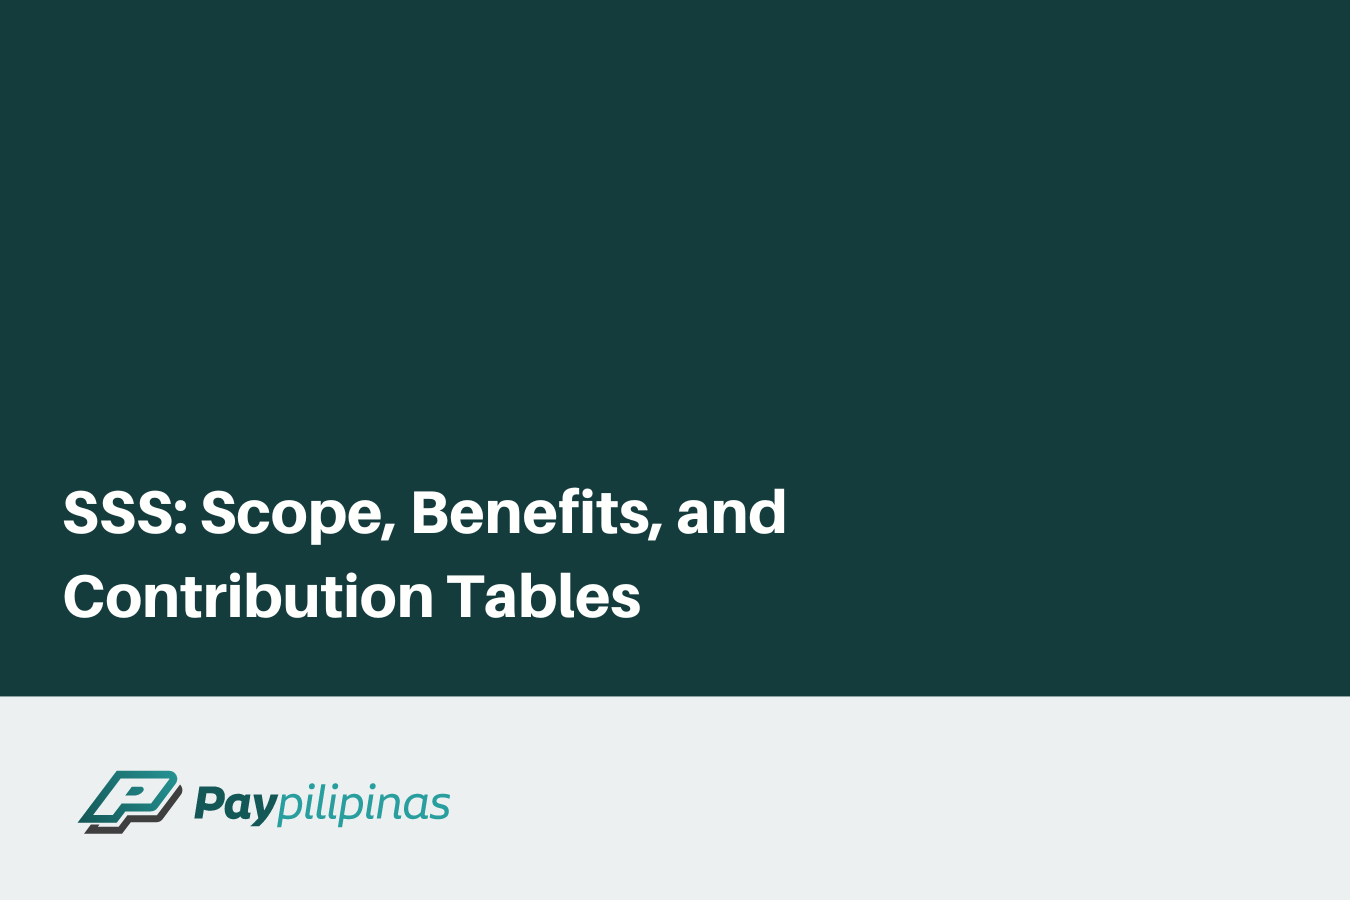 SSS Scope, Benefits, and Contribution Tables